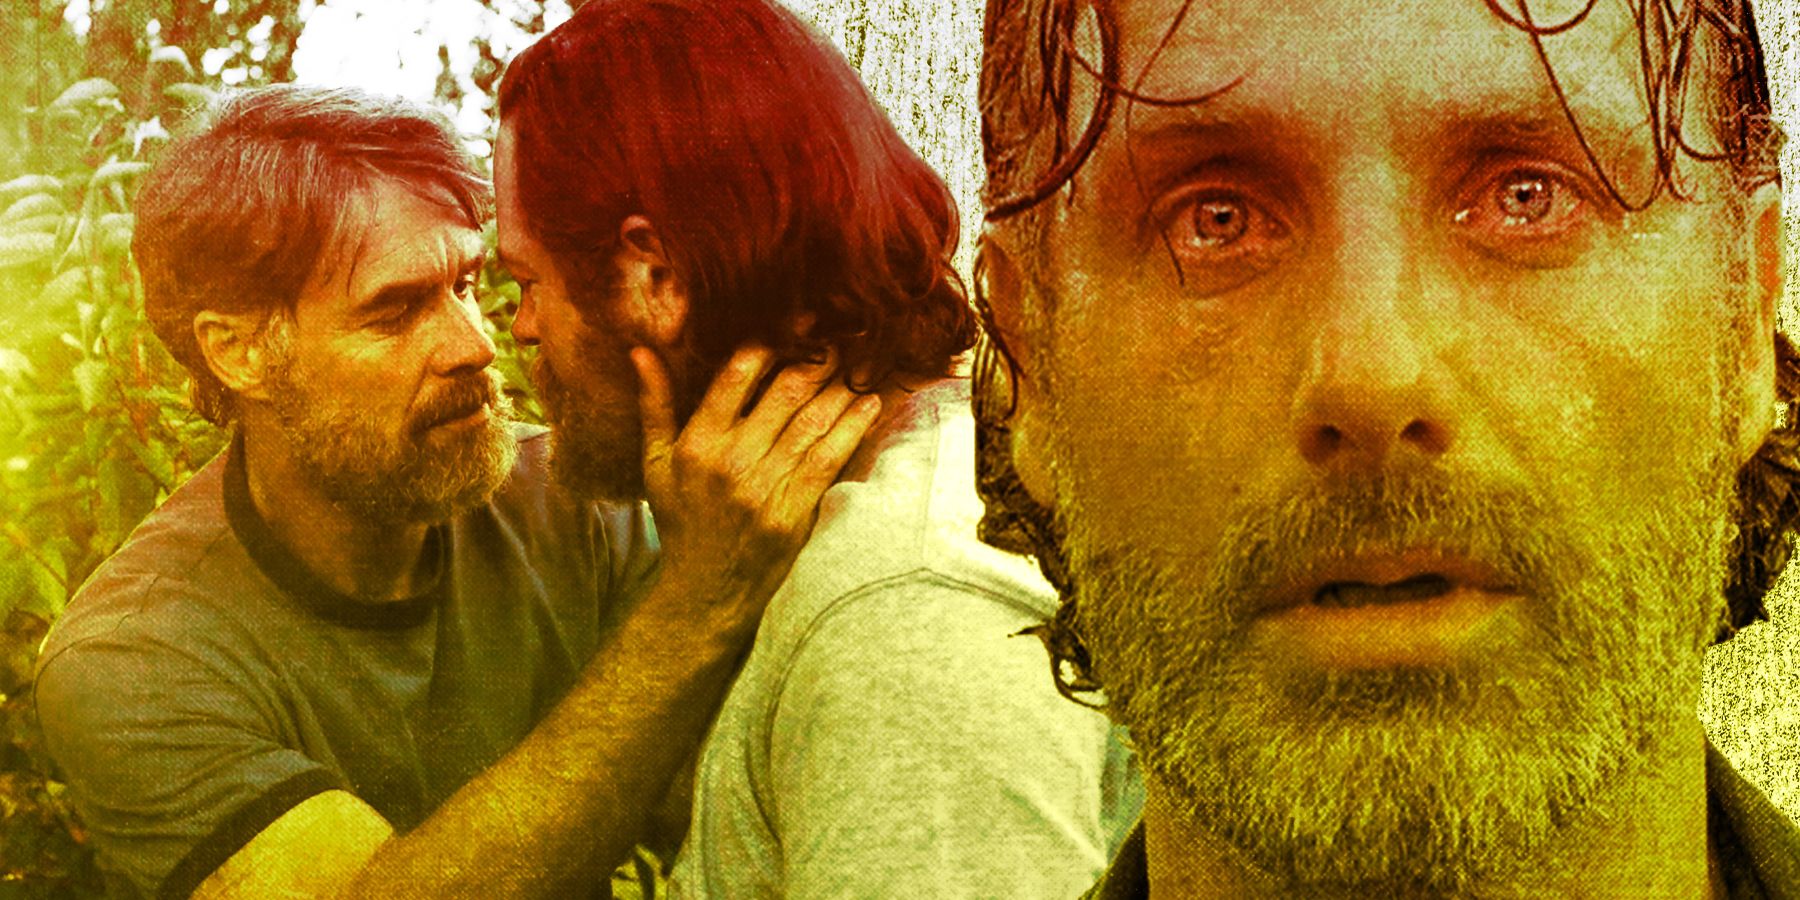 10 'The Last Of Us' Characters and Their 'Walking Dead' Counterparts